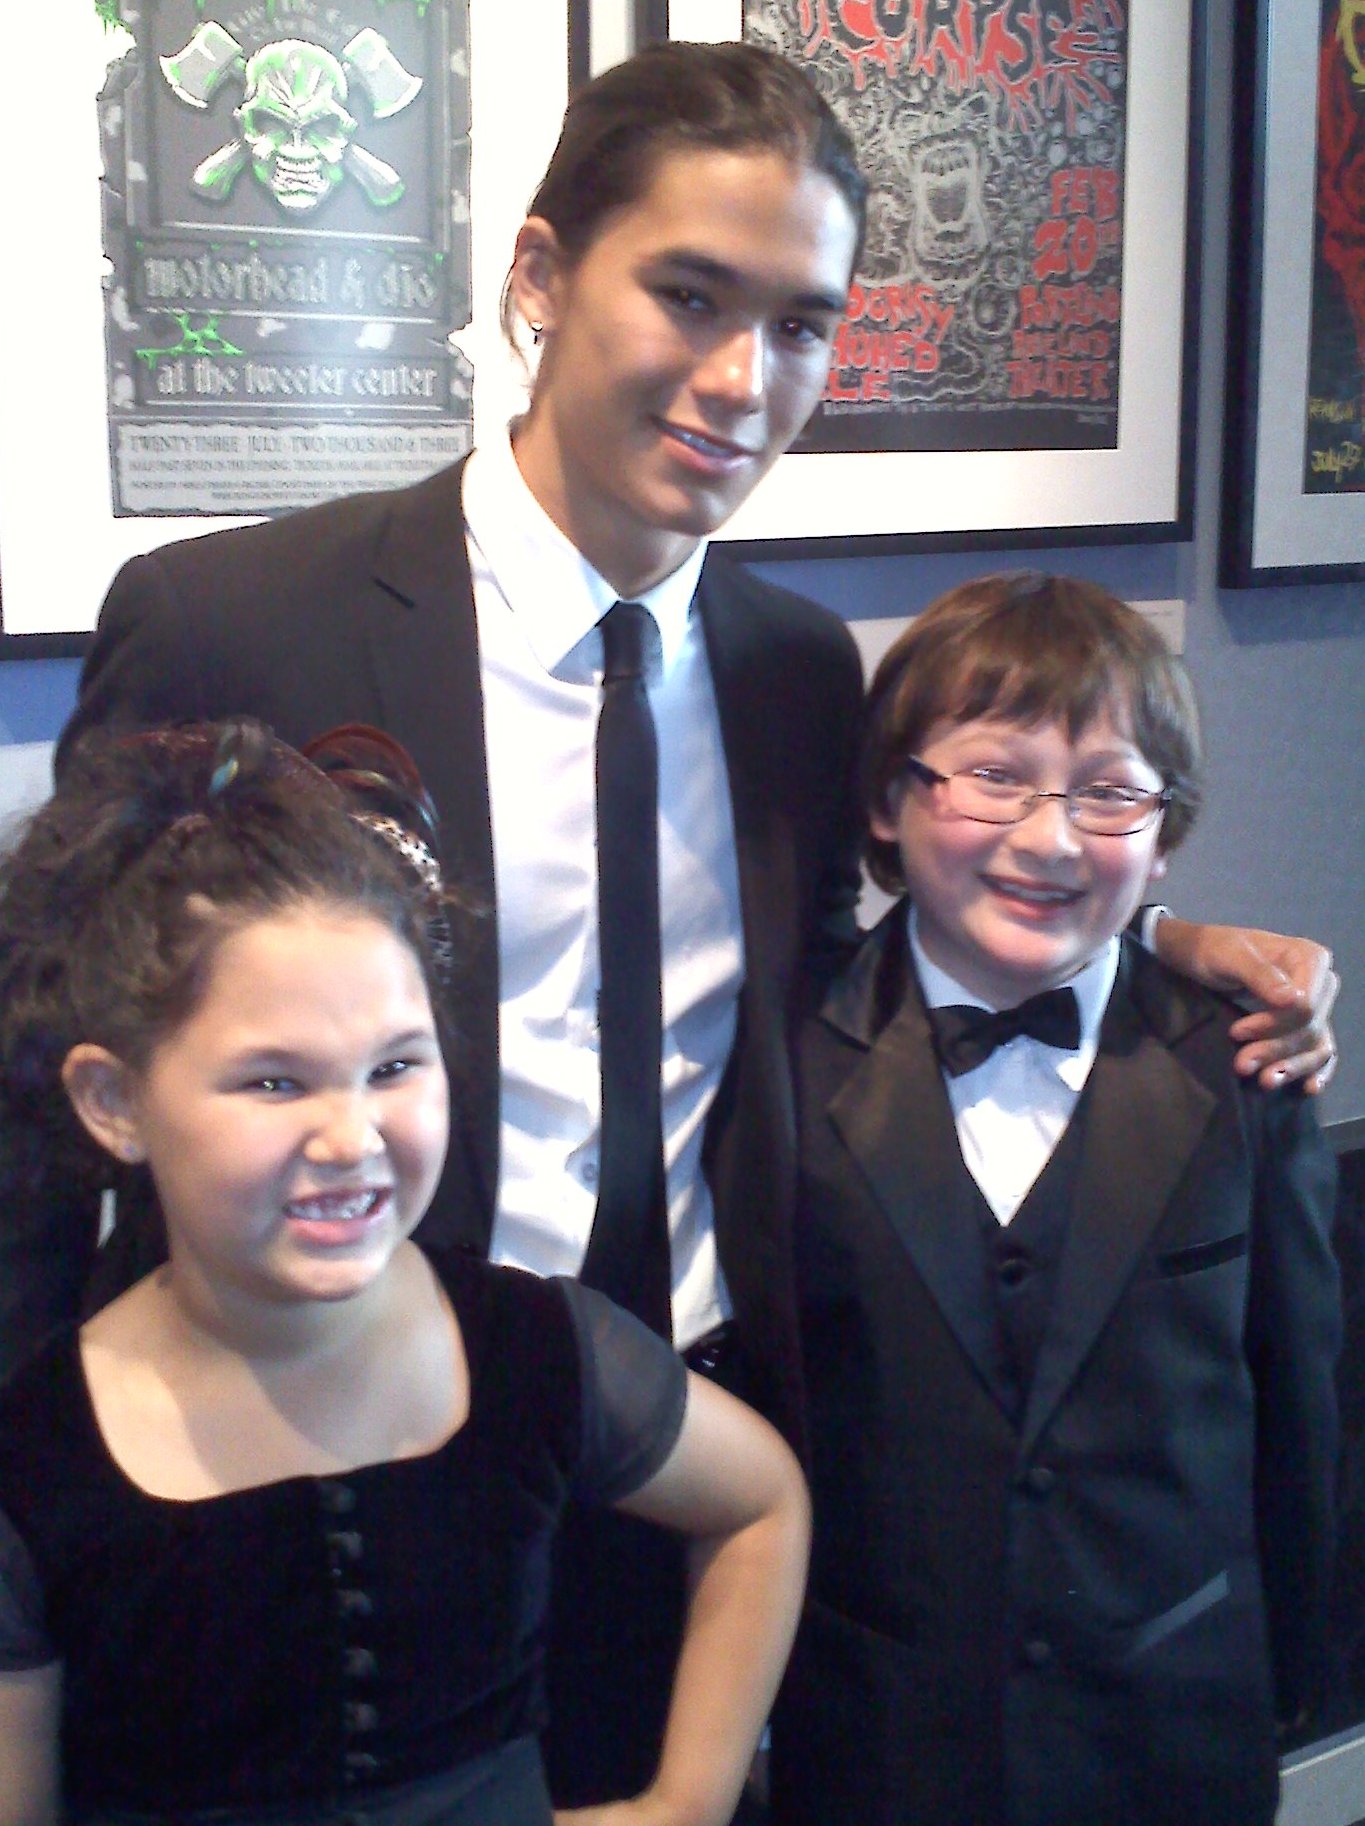 Matthew, Booboo Stewart and his sister, Sage at the Omni Awards 2012 where Matthew won his first BEST ACTOR AWARD!